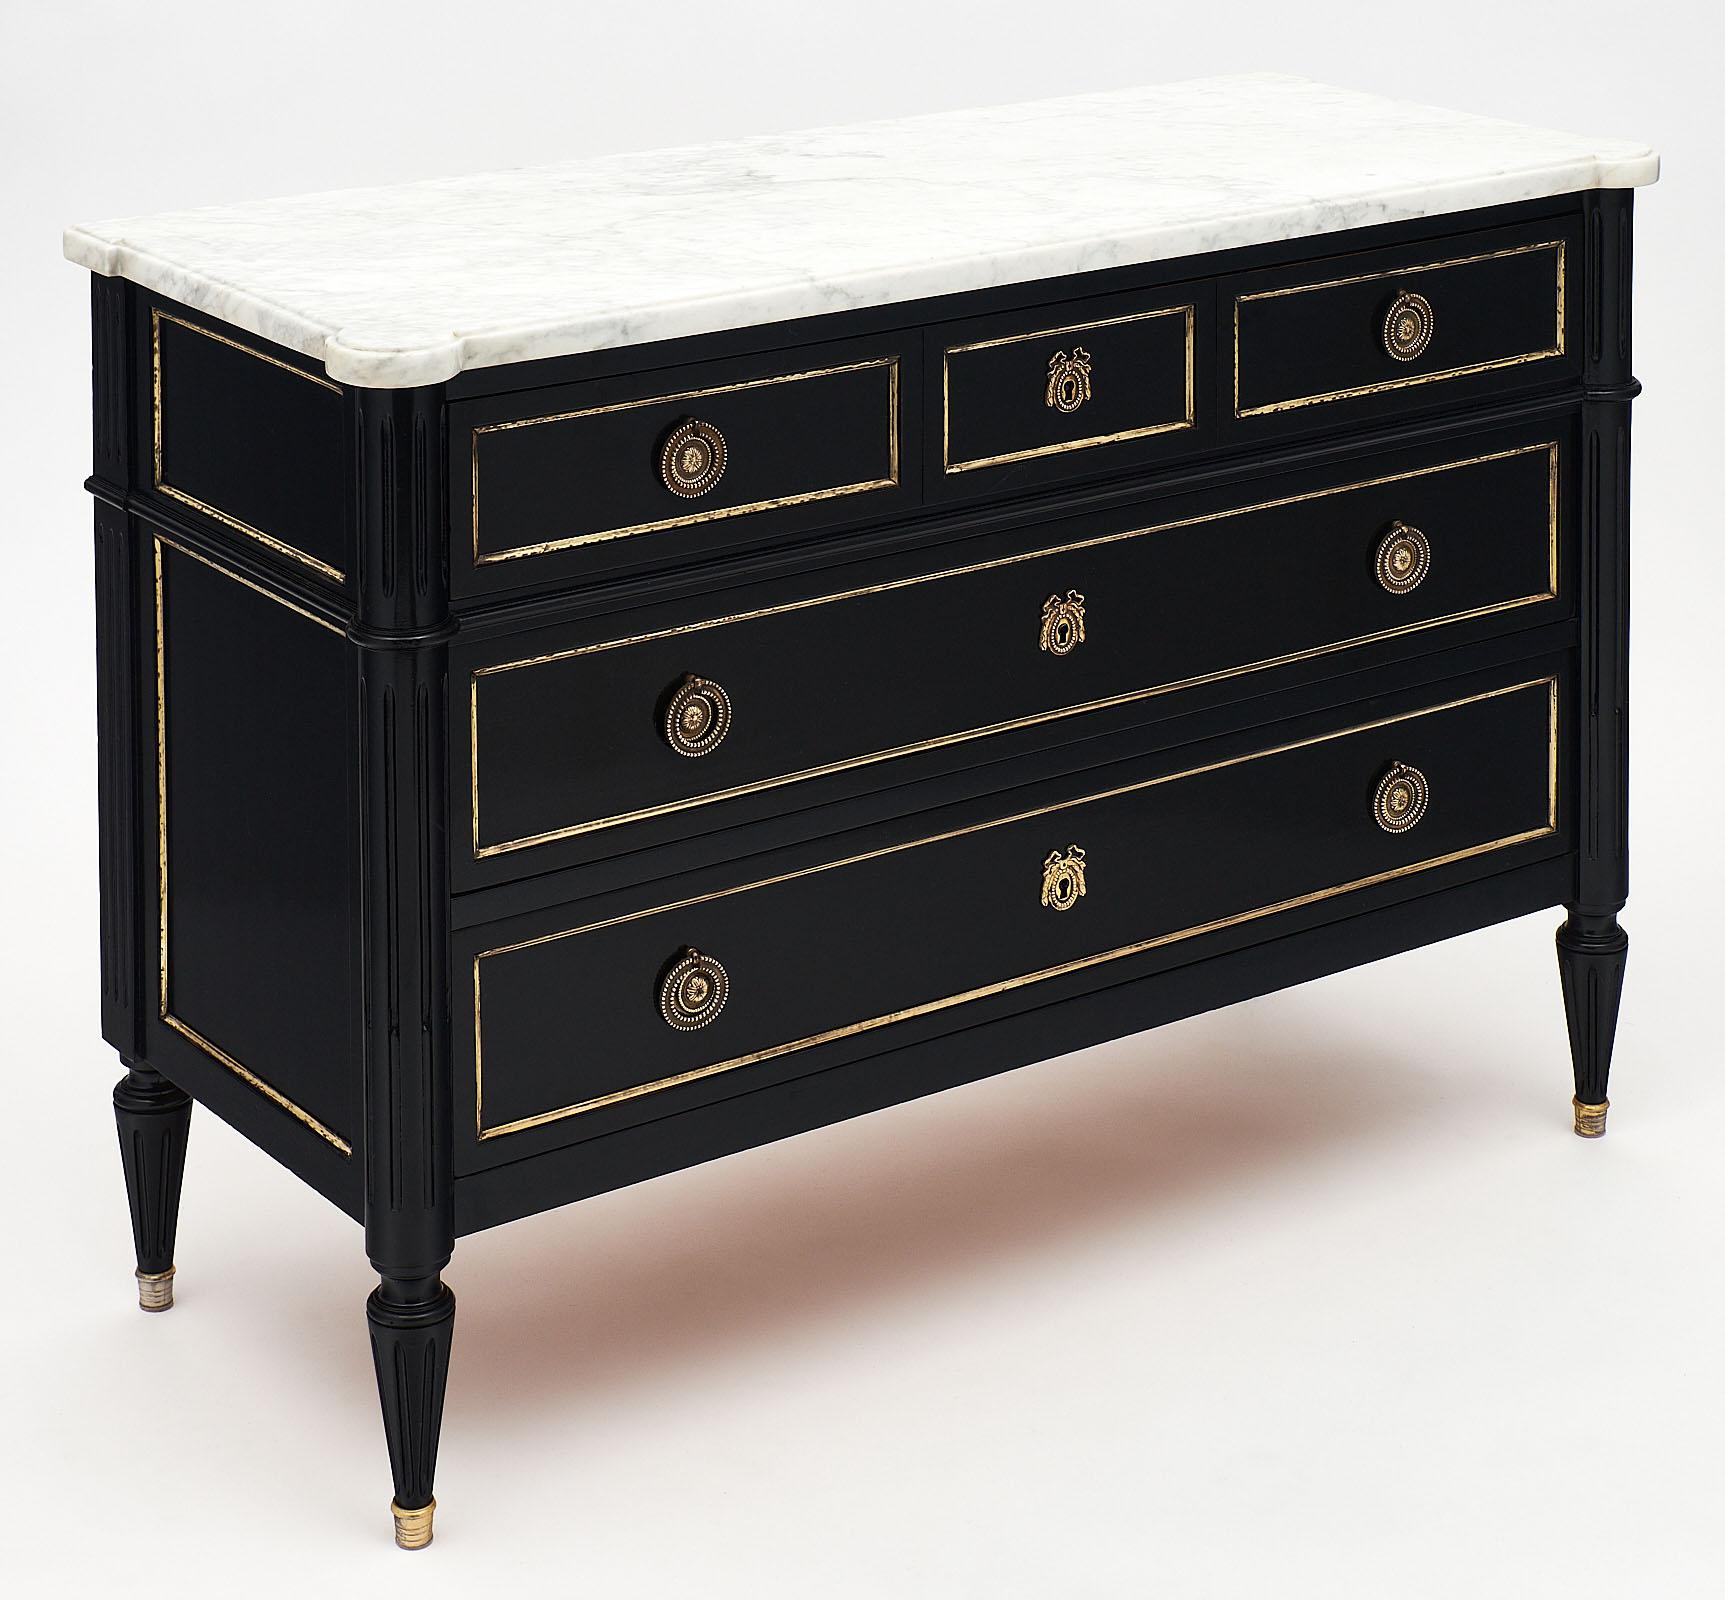 Louis XVI style French antique chest with original Carrara marble top. This piece features brass hardware and trim throughout. It is made of solid mahogany and ebonized with a lustrous French polish finish. We love this classic piece!